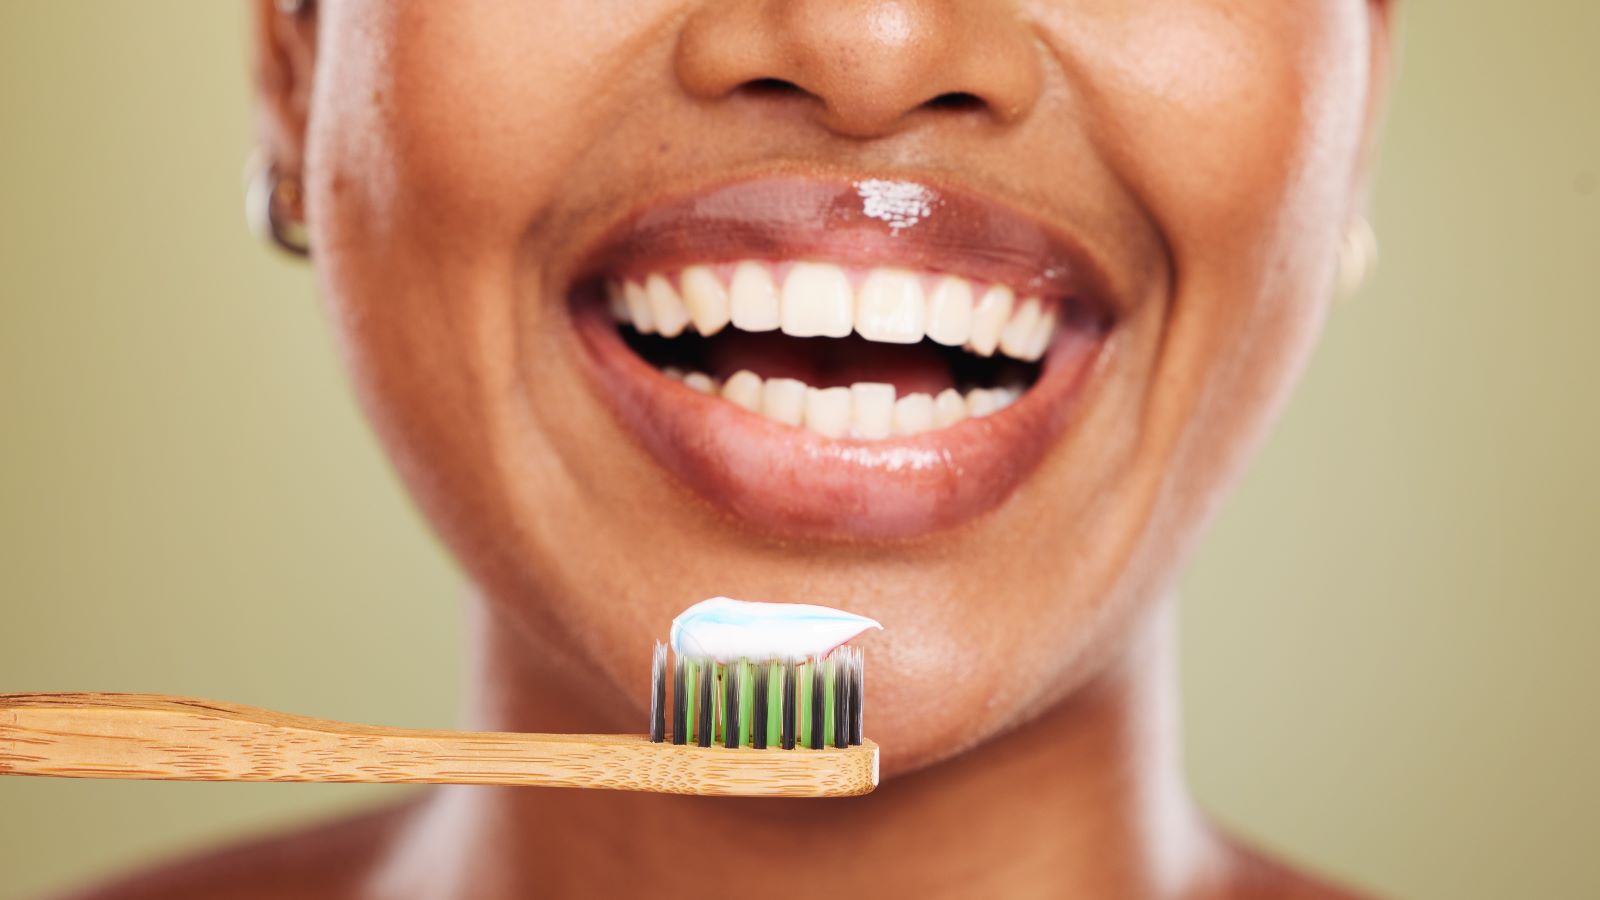 Can Poor Oral Hygiene Cause Cancer?